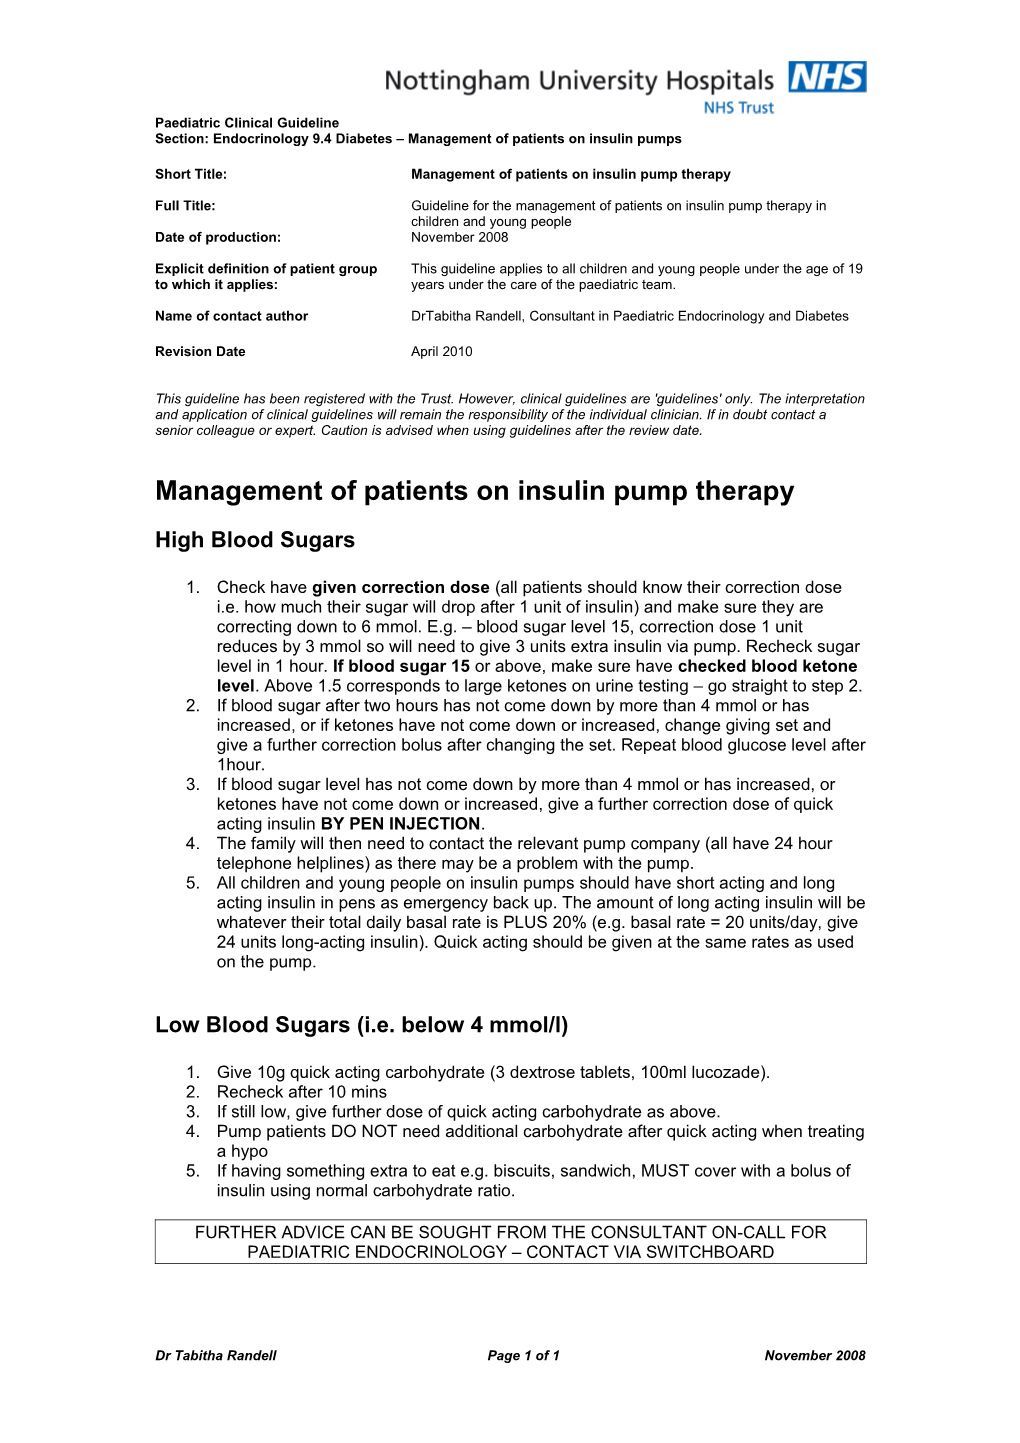 Section: Endocrinology 9.4 Diabetes Management of Patients on Insulin Pumps